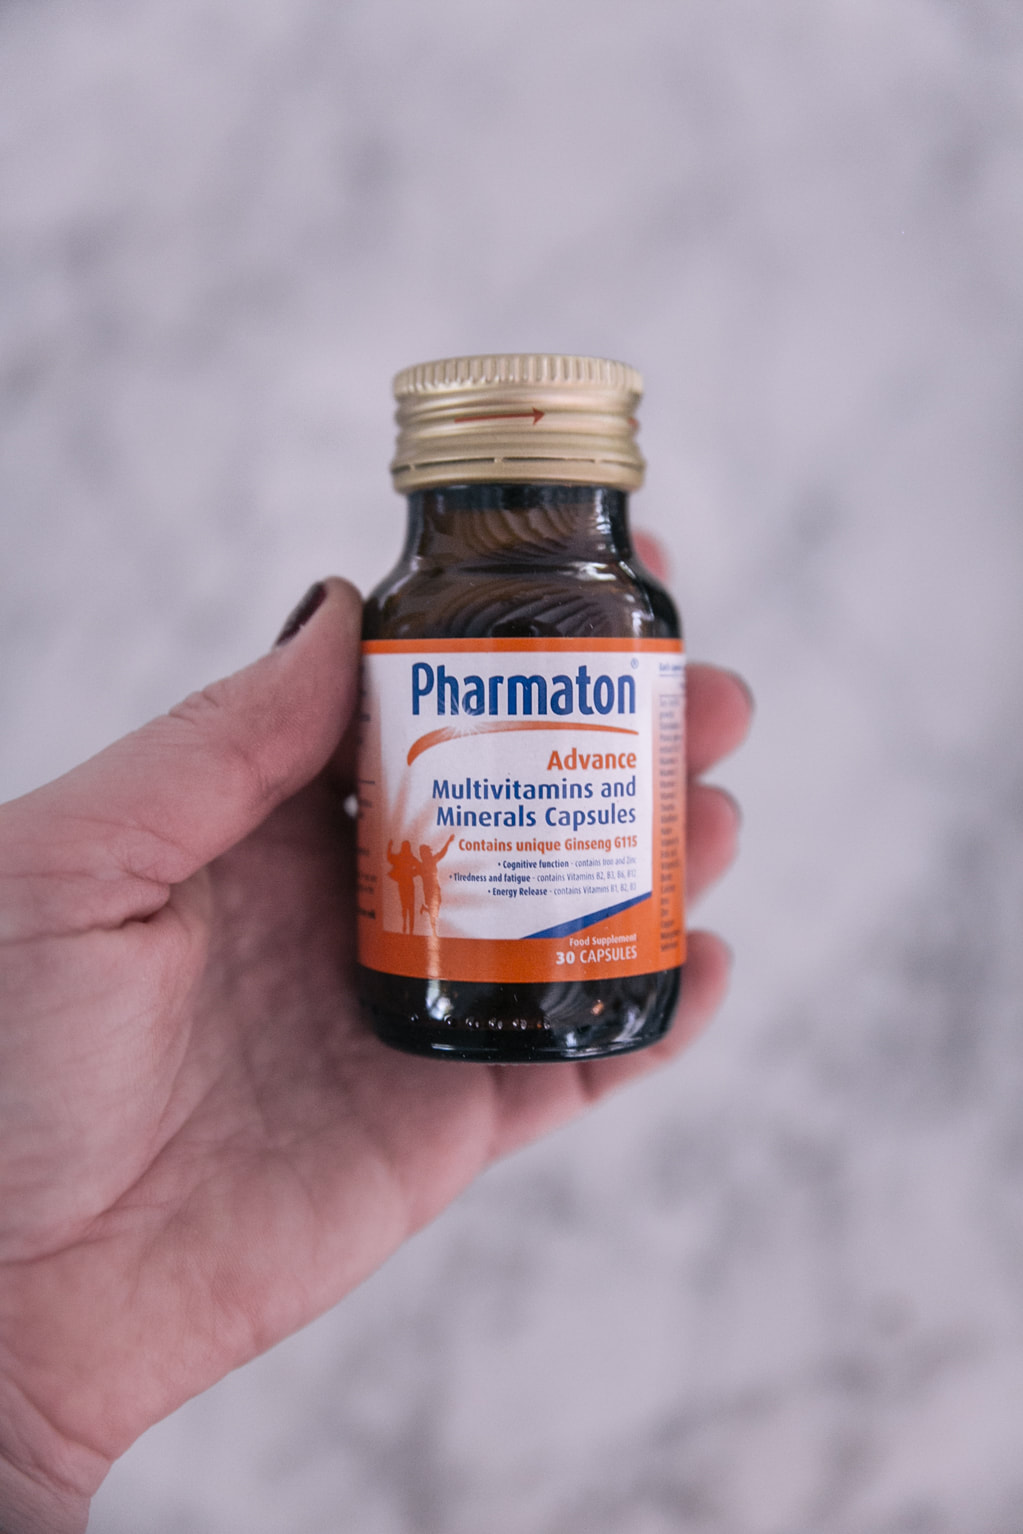 Pharmaton Advance Multivitamin review by The Belle Blog 